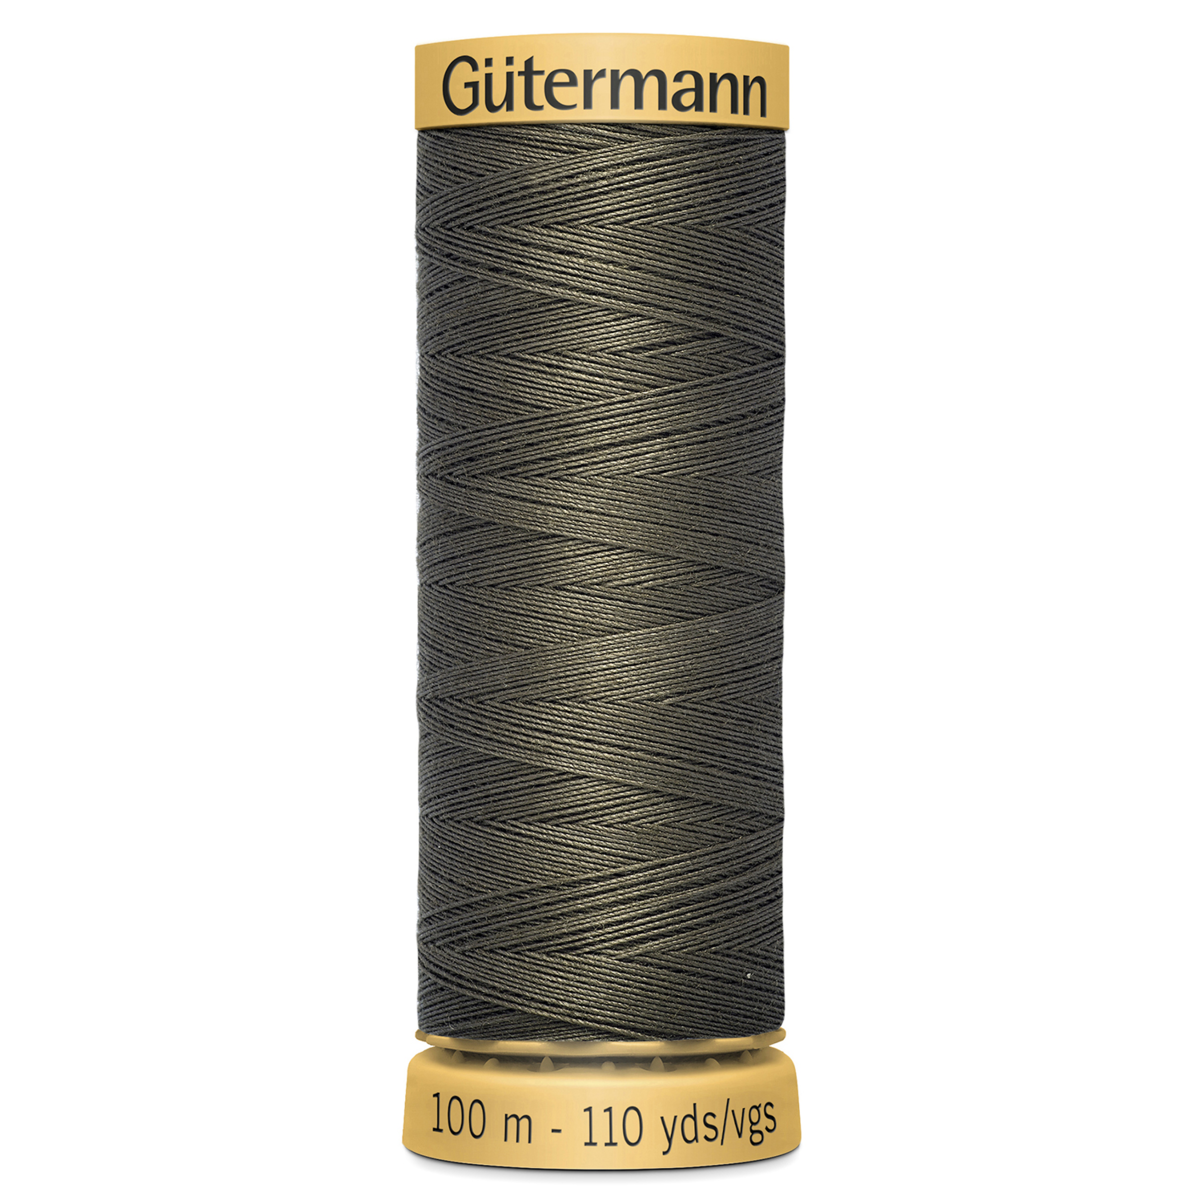 Gutermann Natural Cotton - 1114 from Jaycotts Sewing Supplies